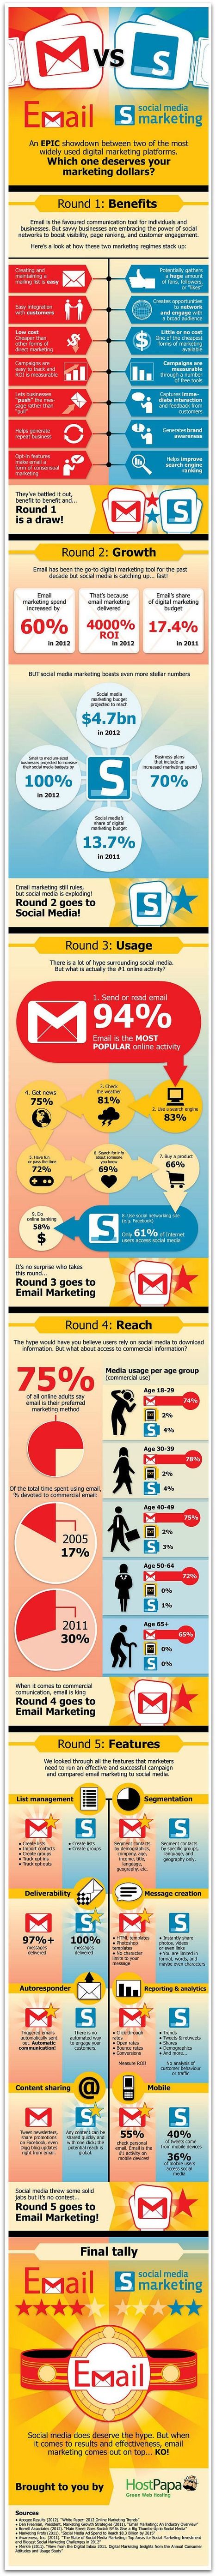 Social media marketing VS email marketing : lequel est le plus efficace ? | Time to Learn | Scoop.it